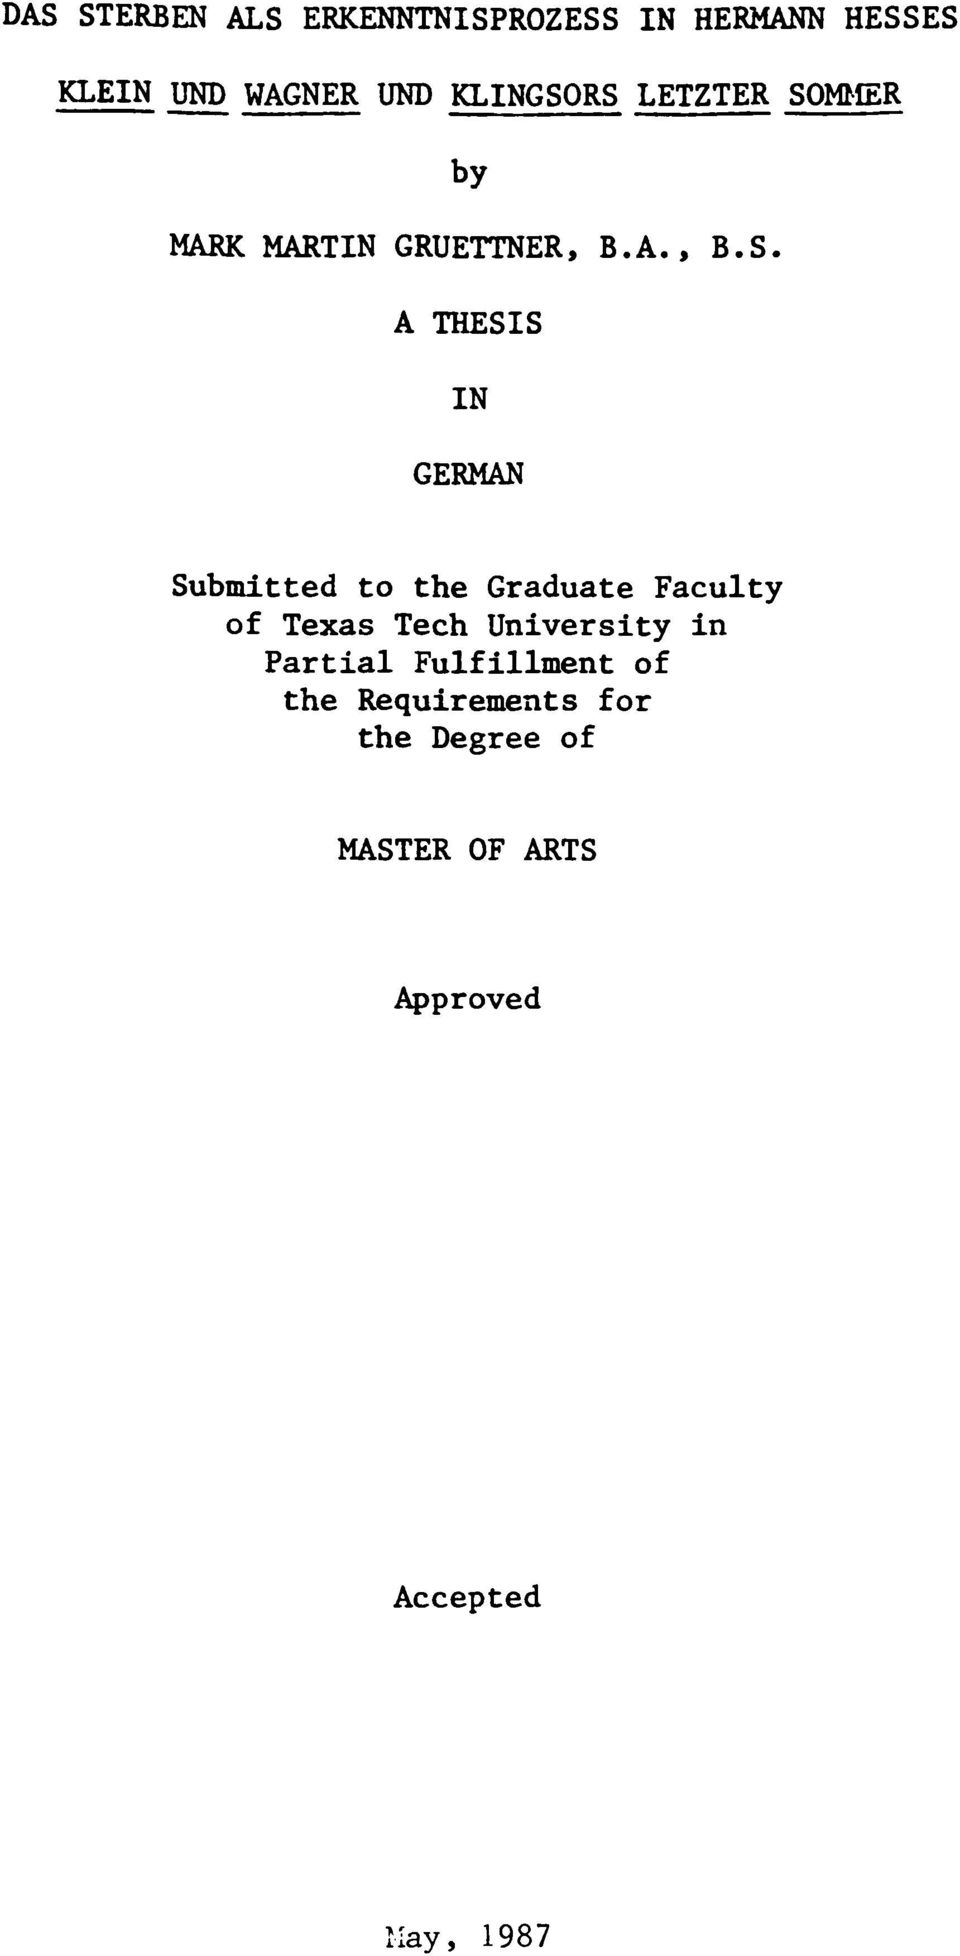 RS LETZTER SOM^ER by MARK MARTIN GRUETTNER, B.A., B.S. A THESIS IN GERMAN